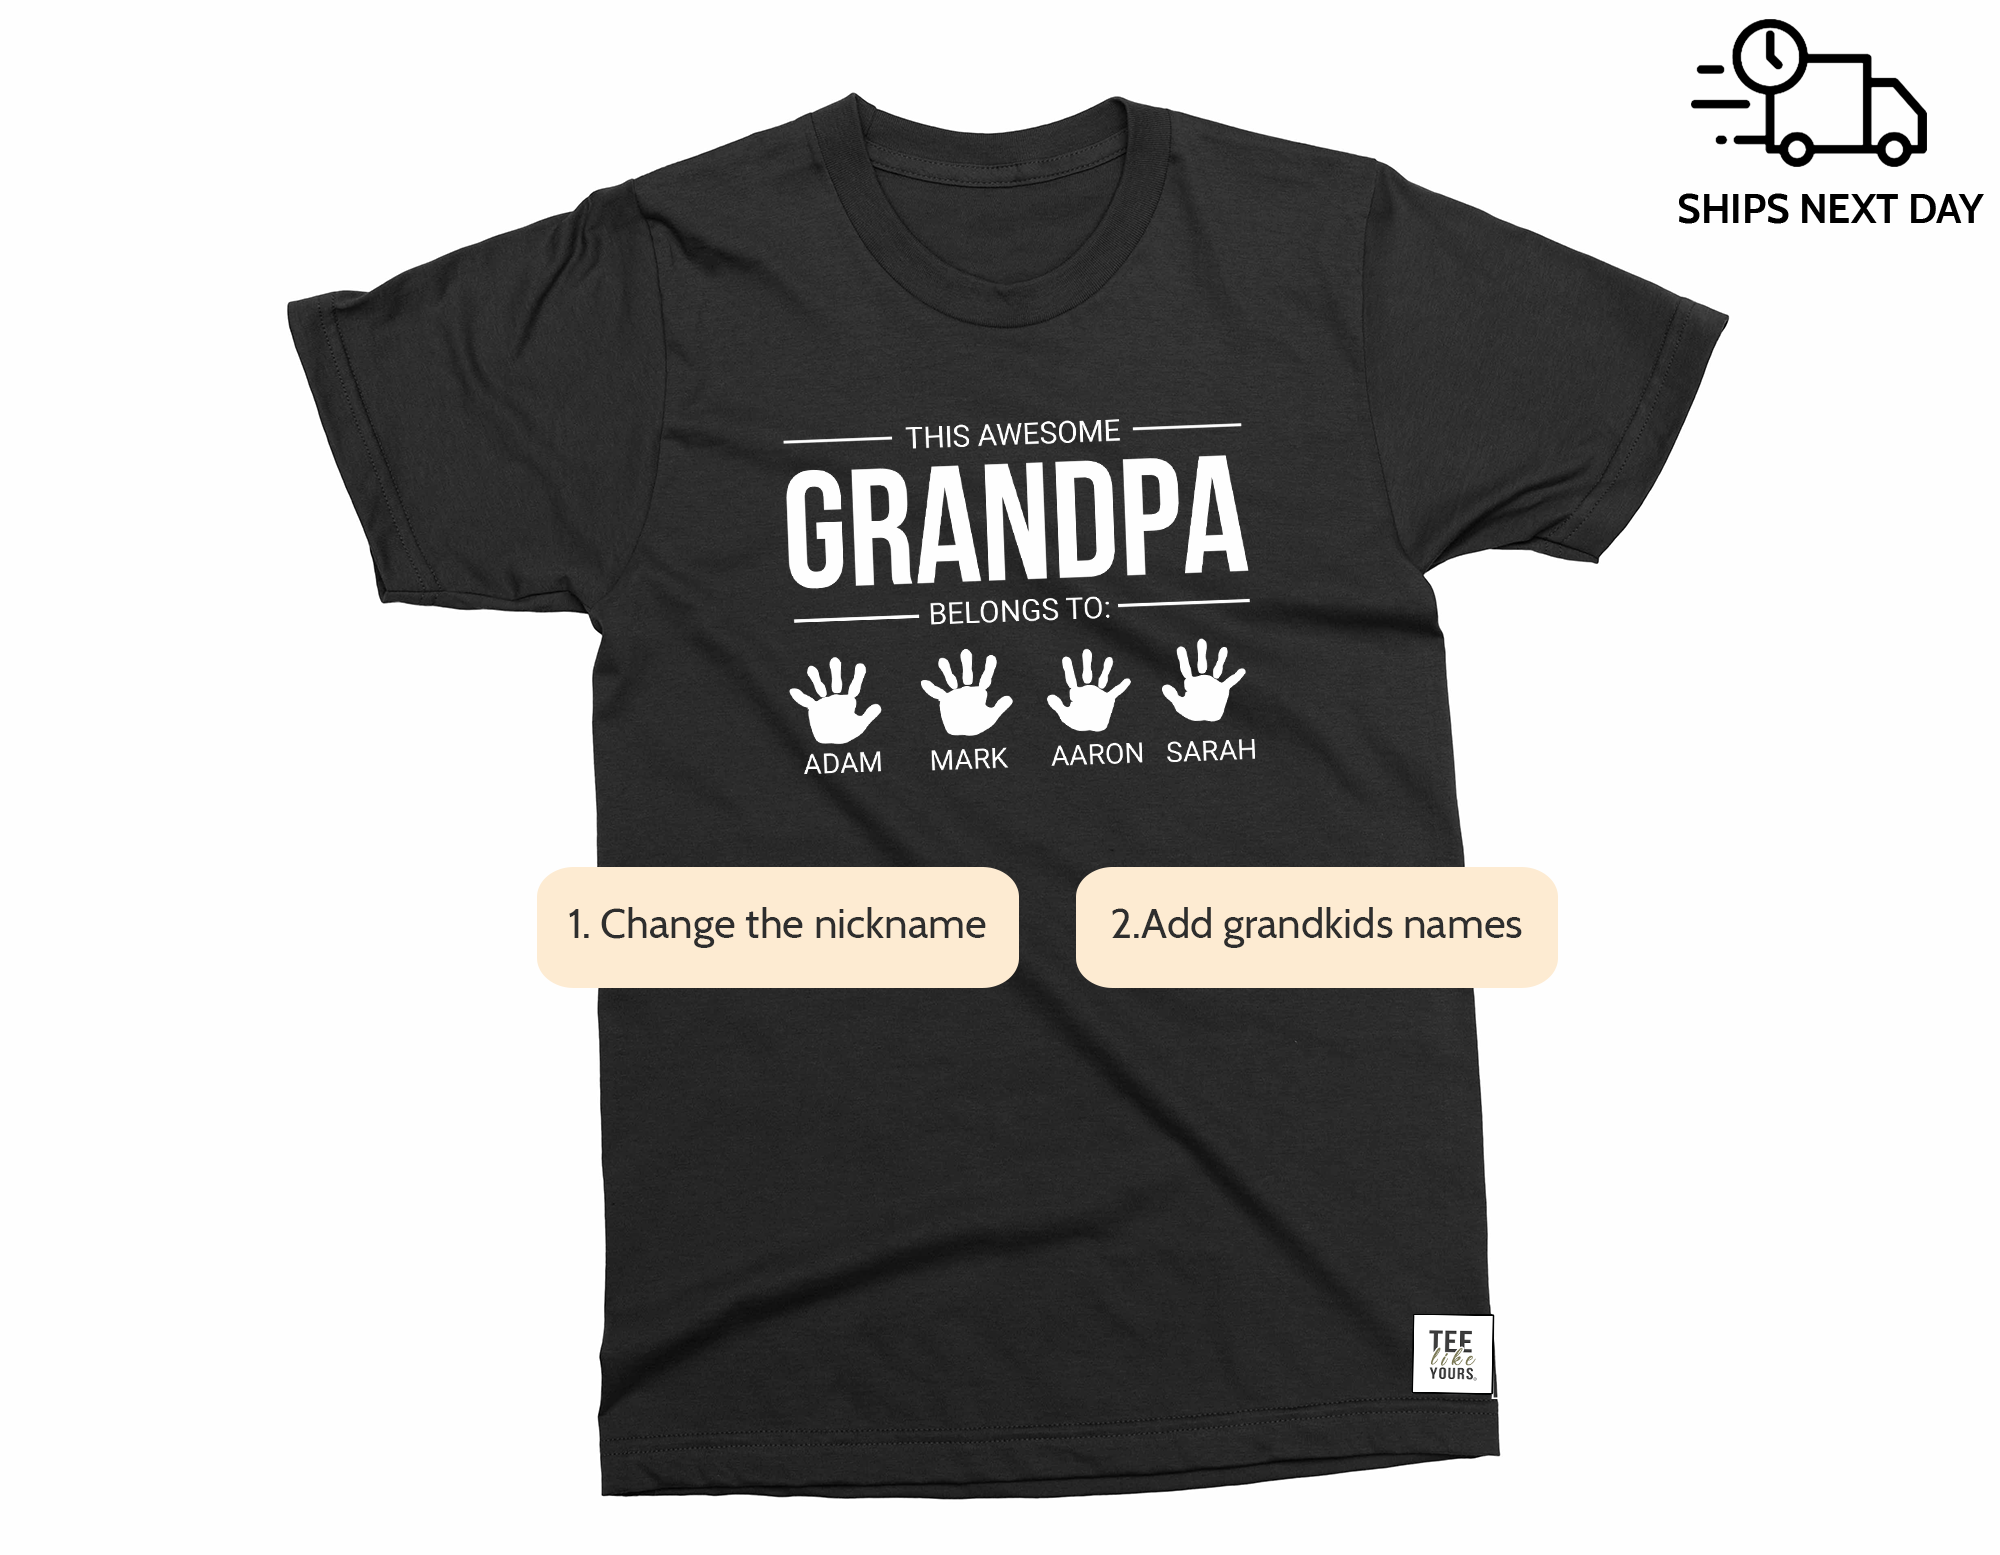 This Awesome Grandpa-Personalized Grandpa t-shirt with Grandkids names –